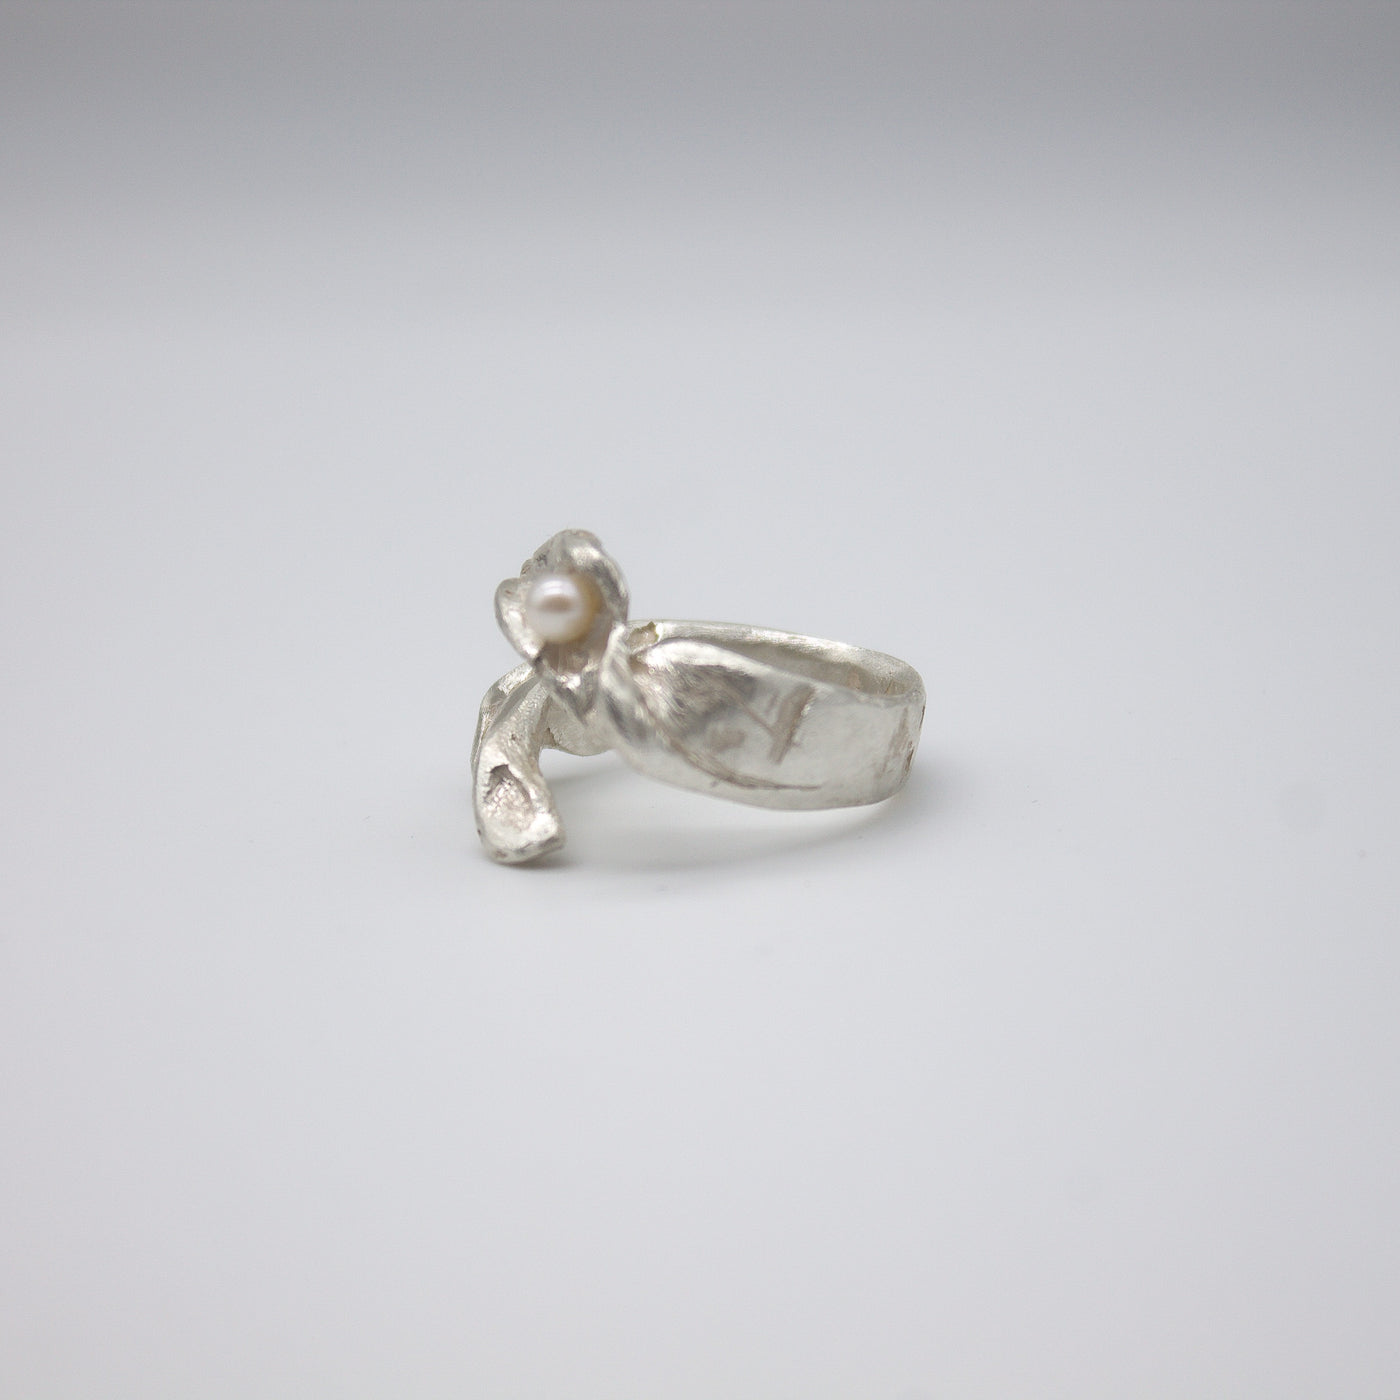 ELVDAL // Fine silver ring with a small freshwater pearl